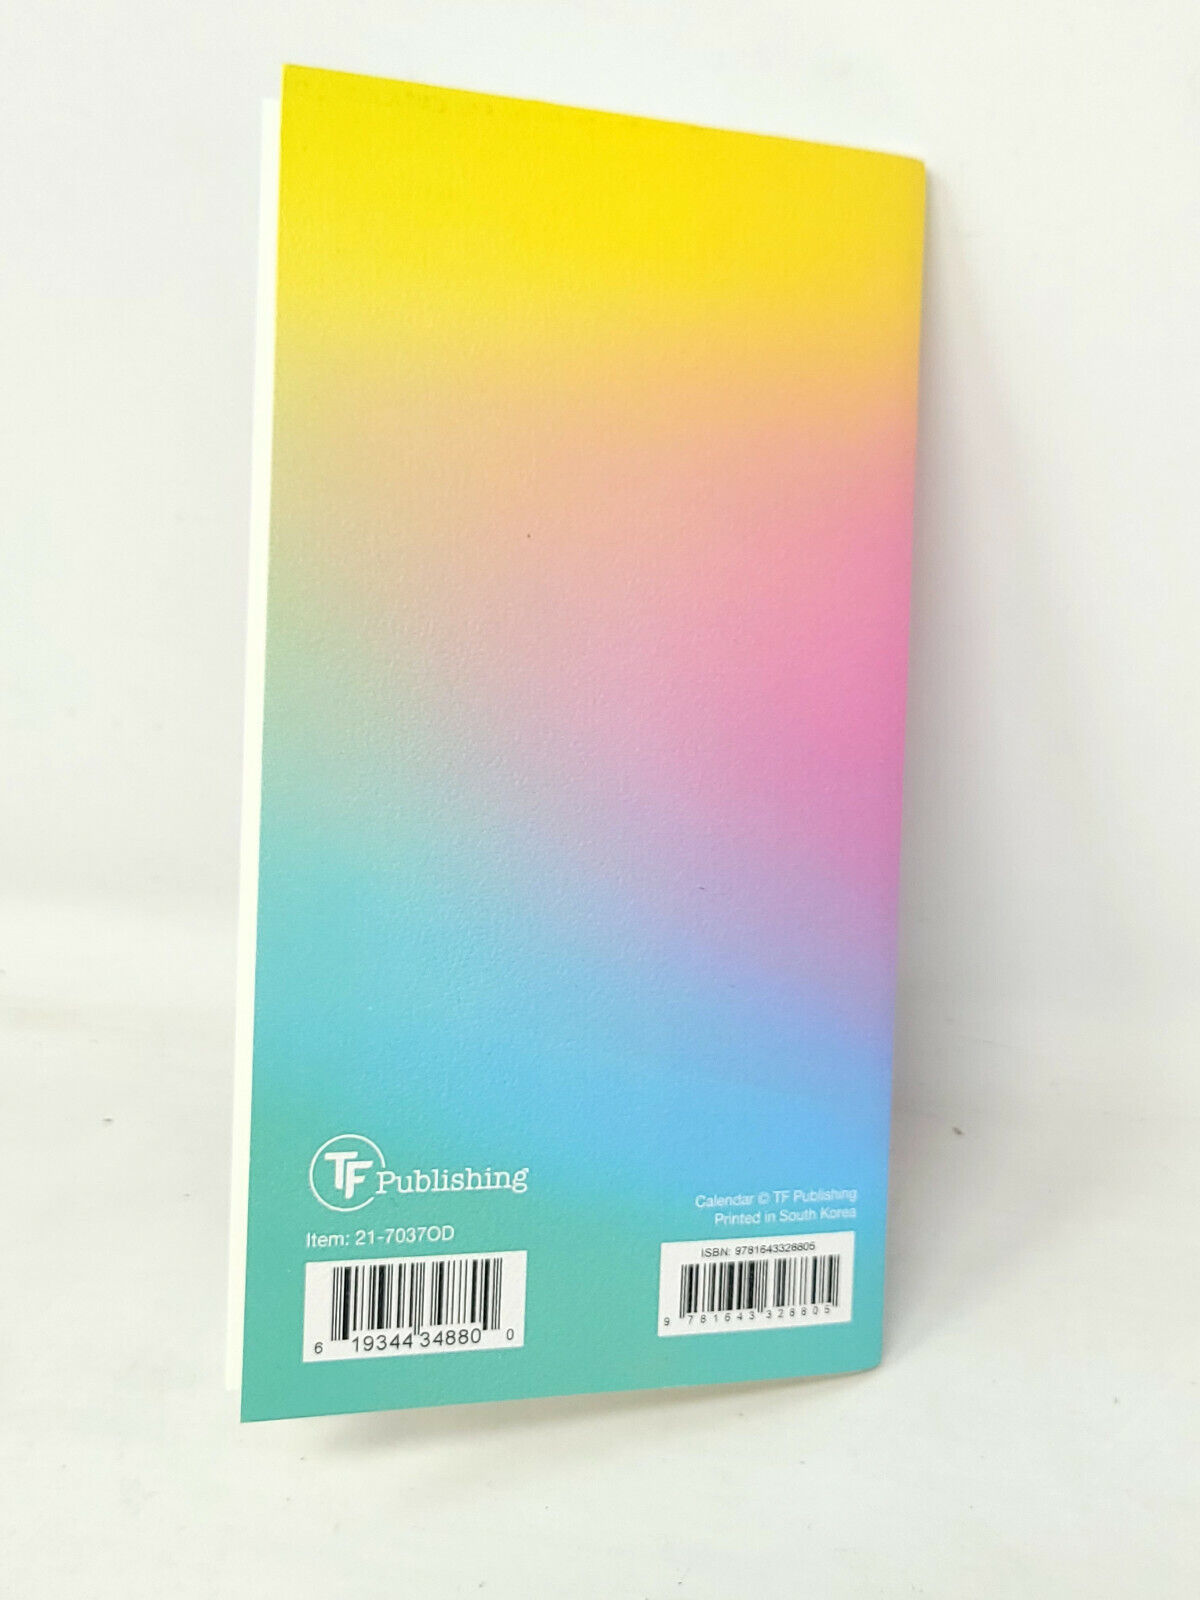 2021-2022 Pocket Planner Monthly Calendar "Do More Happy"  6.75x3.75" - NEW